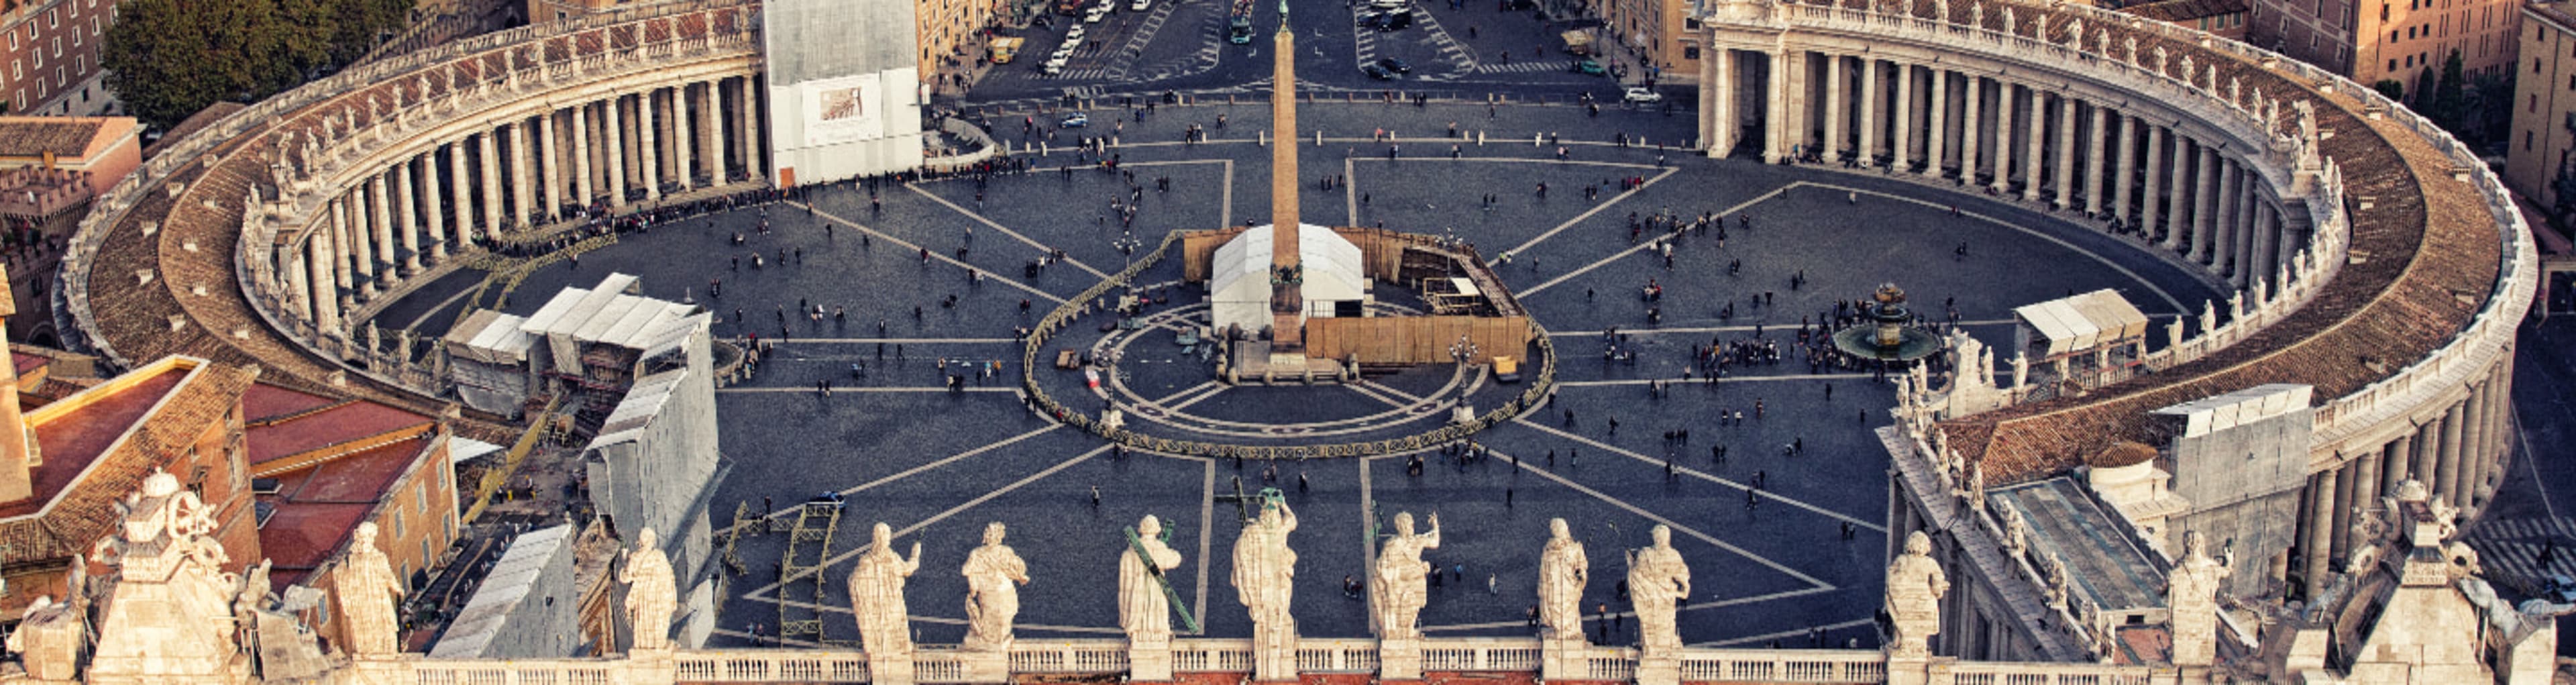 Vatican City viewed from above